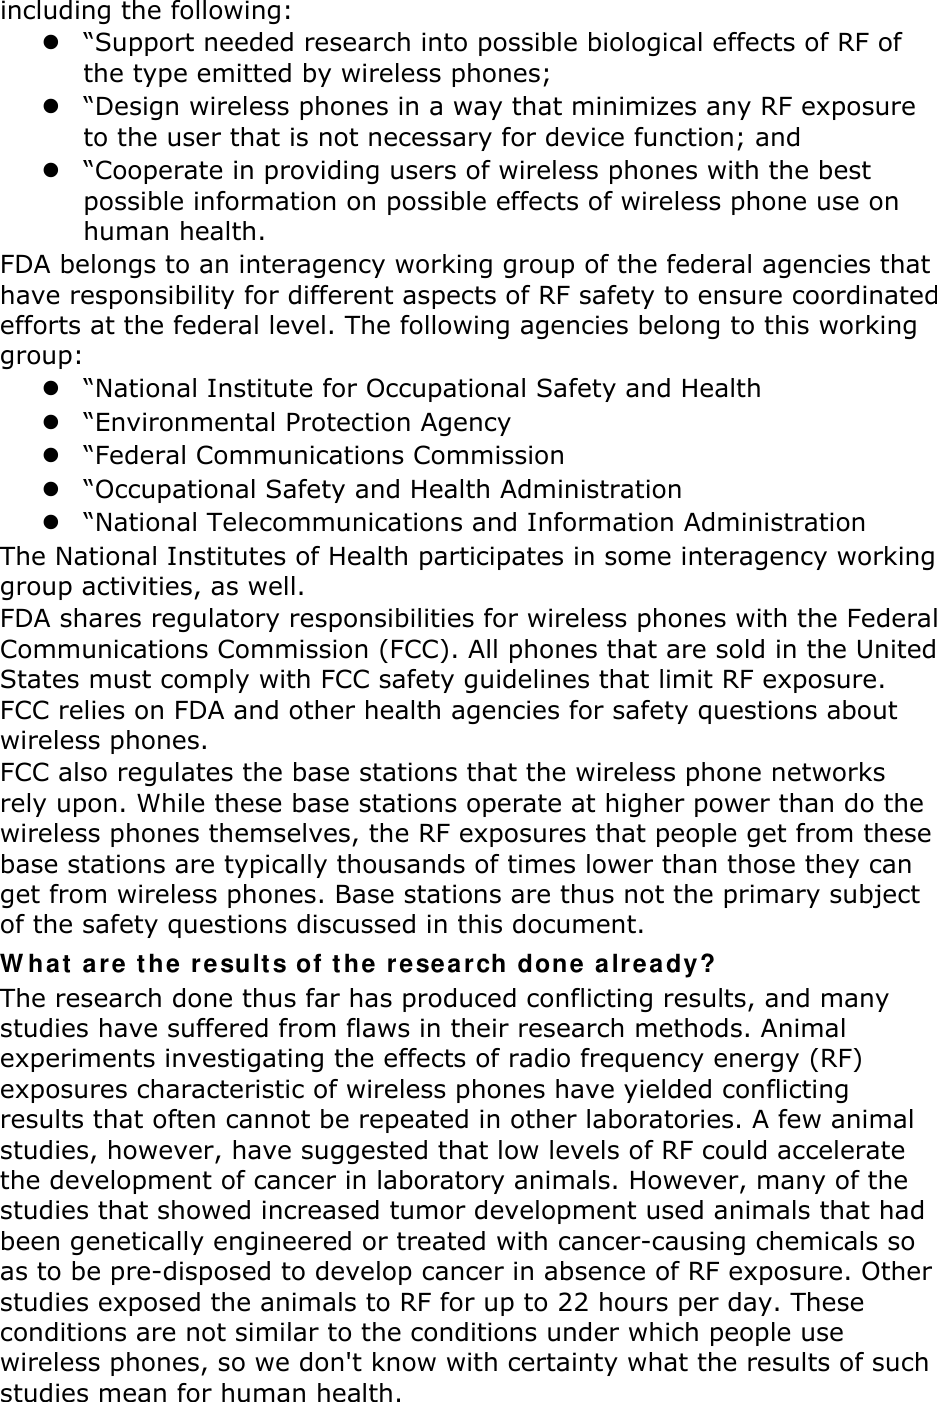 including the following:  “Support needed research into possible biological effects of RF of the type emitted by wireless phones;  “Design wireless phones in a way that minimizes any RF exposure to the user that is not necessary for device function; and  “Cooperate in providing users of wireless phones with the best possible information on possible effects of wireless phone use on human health. FDA belongs to an interagency working group of the federal agencies that have responsibility for different aspects of RF safety to ensure coordinated efforts at the federal level. The following agencies belong to this working group:  “National Institute for Occupational Safety and Health  “Environmental Protection Agency  “Federal Communications Commission  “Occupational Safety and Health Administration  “National Telecommunications and Information Administration The National Institutes of Health participates in some interagency working group activities, as well. FDA shares regulatory responsibilities for wireless phones with the Federal Communications Commission (FCC). All phones that are sold in the United States must comply with FCC safety guidelines that limit RF exposure. FCC relies on FDA and other health agencies for safety questions about wireless phones. FCC also regulates the base stations that the wireless phone networks rely upon. While these base stations operate at higher power than do the wireless phones themselves, the RF exposures that people get from these base stations are typically thousands of times lower than those they can get from wireless phones. Base stations are thus not the primary subject of the safety questions discussed in this document. What are the results of the research done already? The research done thus far has produced conflicting results, and many studies have suffered from flaws in their research methods. Animal experiments investigating the effects of radio frequency energy (RF) exposures characteristic of wireless phones have yielded conflicting results that often cannot be repeated in other laboratories. A few animal studies, however, have suggested that low levels of RF could accelerate the development of cancer in laboratory animals. However, many of the studies that showed increased tumor development used animals that had been genetically engineered or treated with cancer-causing chemicals so as to be pre-disposed to develop cancer in absence of RF exposure. Other studies exposed the animals to RF for up to 22 hours per day. These conditions are not similar to the conditions under which people use wireless phones, so we don&apos;t know with certainty what the results of such studies mean for human health. 